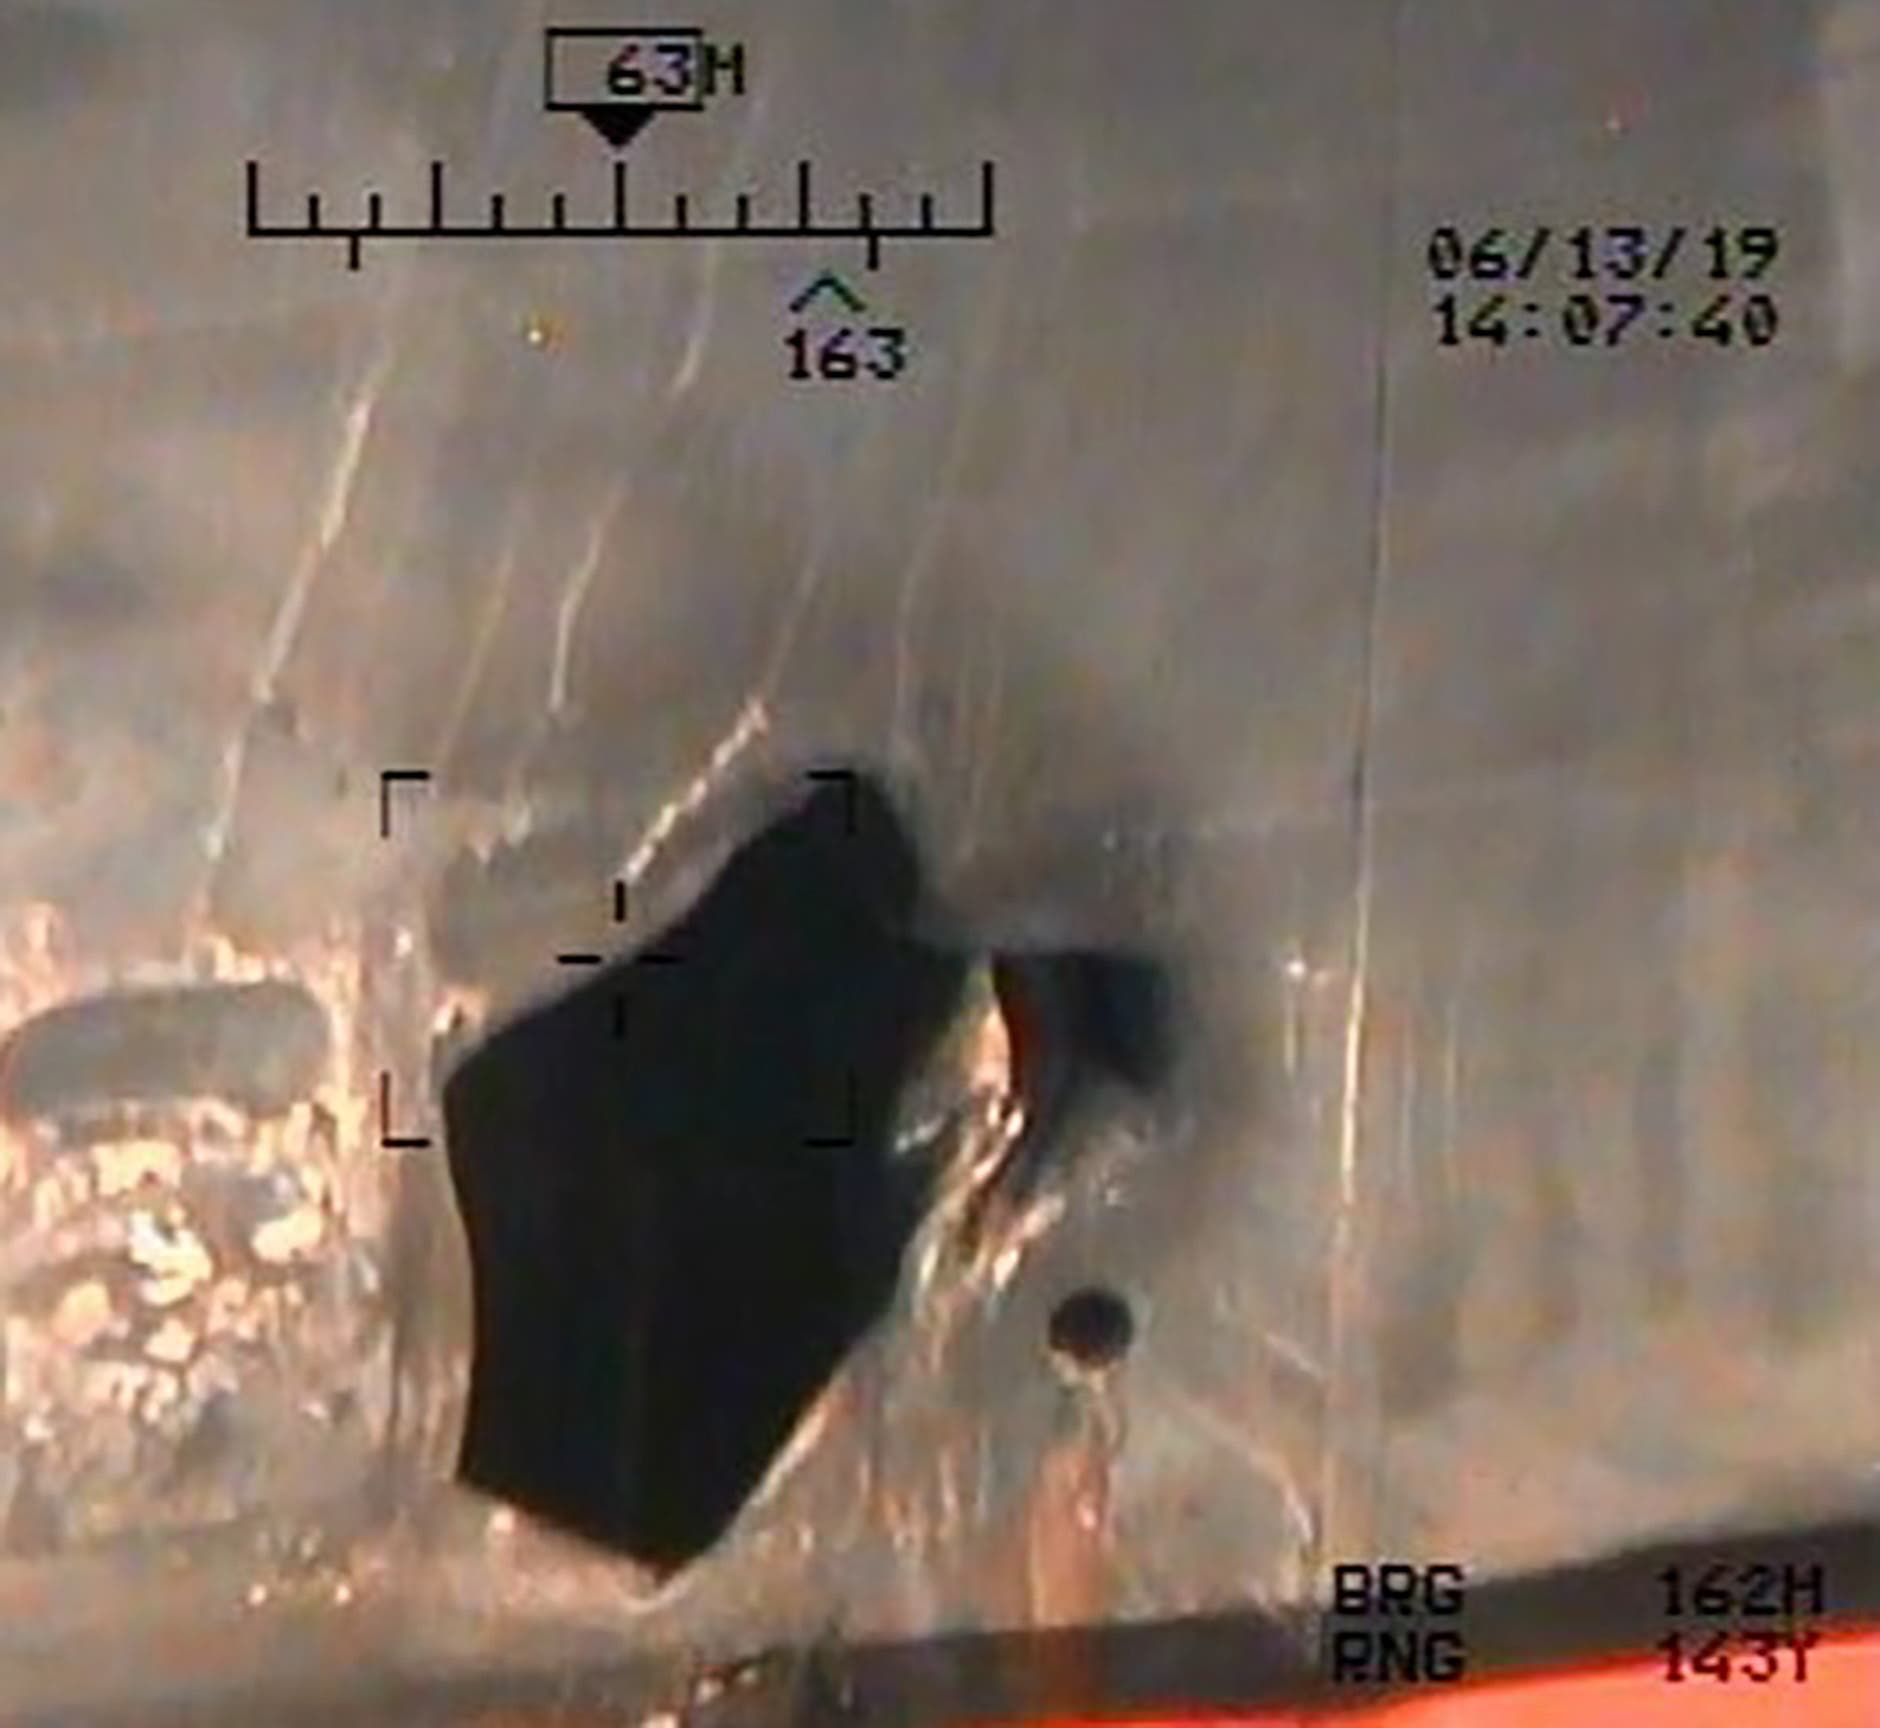 One of the photos released Monday shows what the Pentagon described as “the remnants of the magnetic attachment device of (an) unexploded limpet mine,” while others picture the place where the mine was allegedly attached. (AFP)